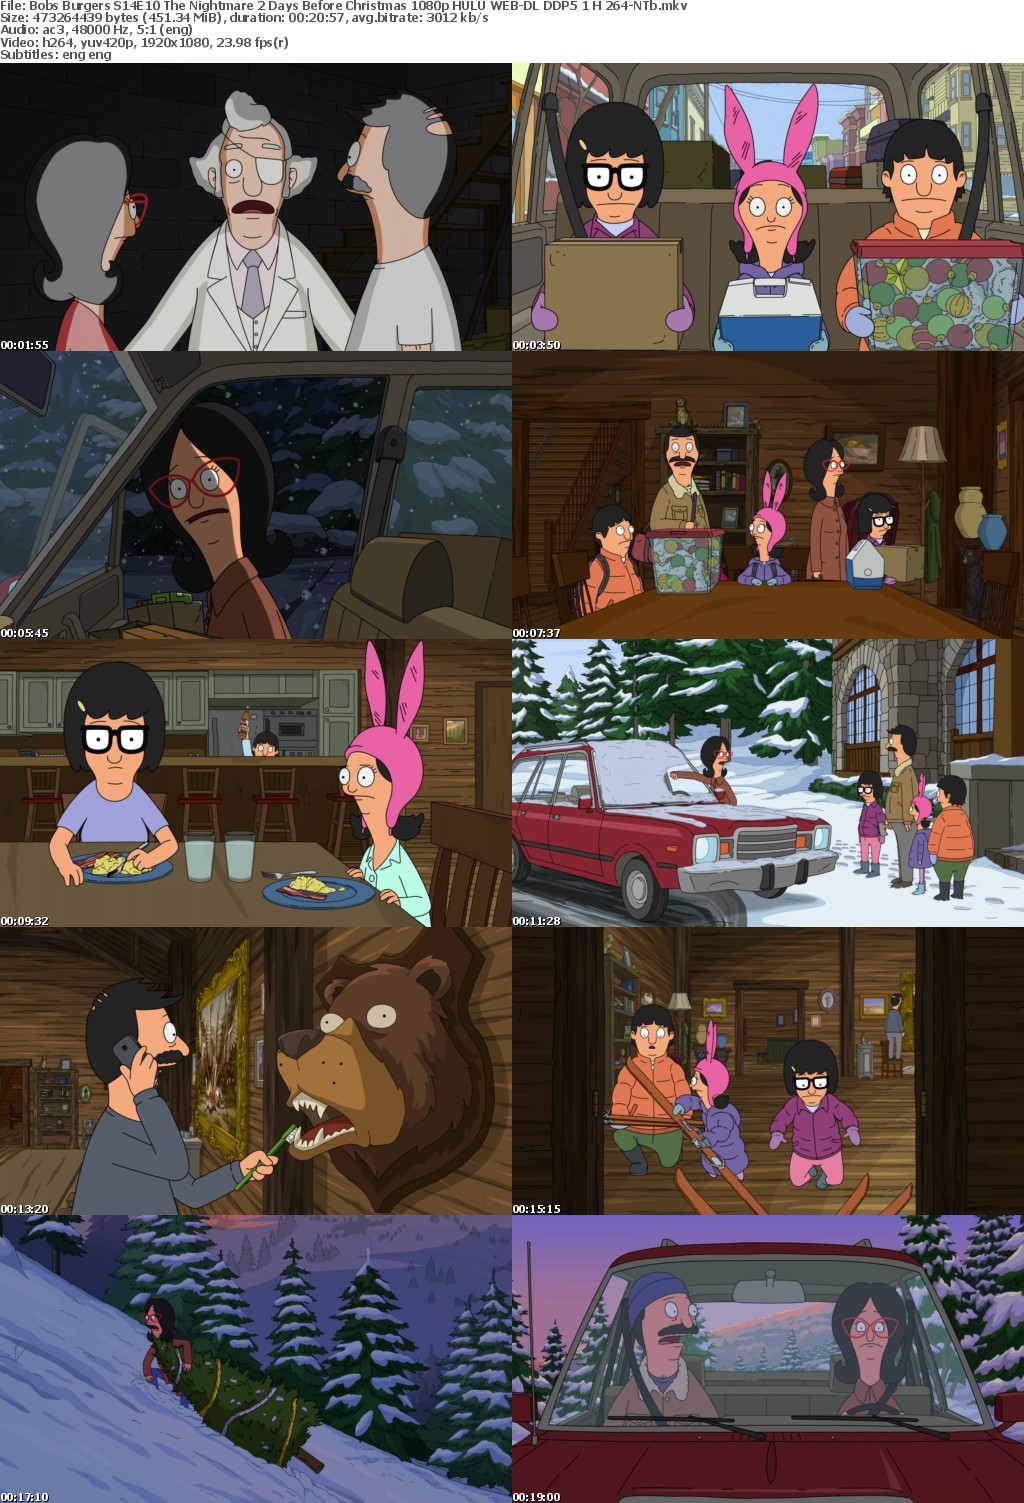 Bobs Burgers S14E10 The Nightmare 2 Days Before Christmas 1080p HULU WEB-DL DDP5 1 H 264-NTb